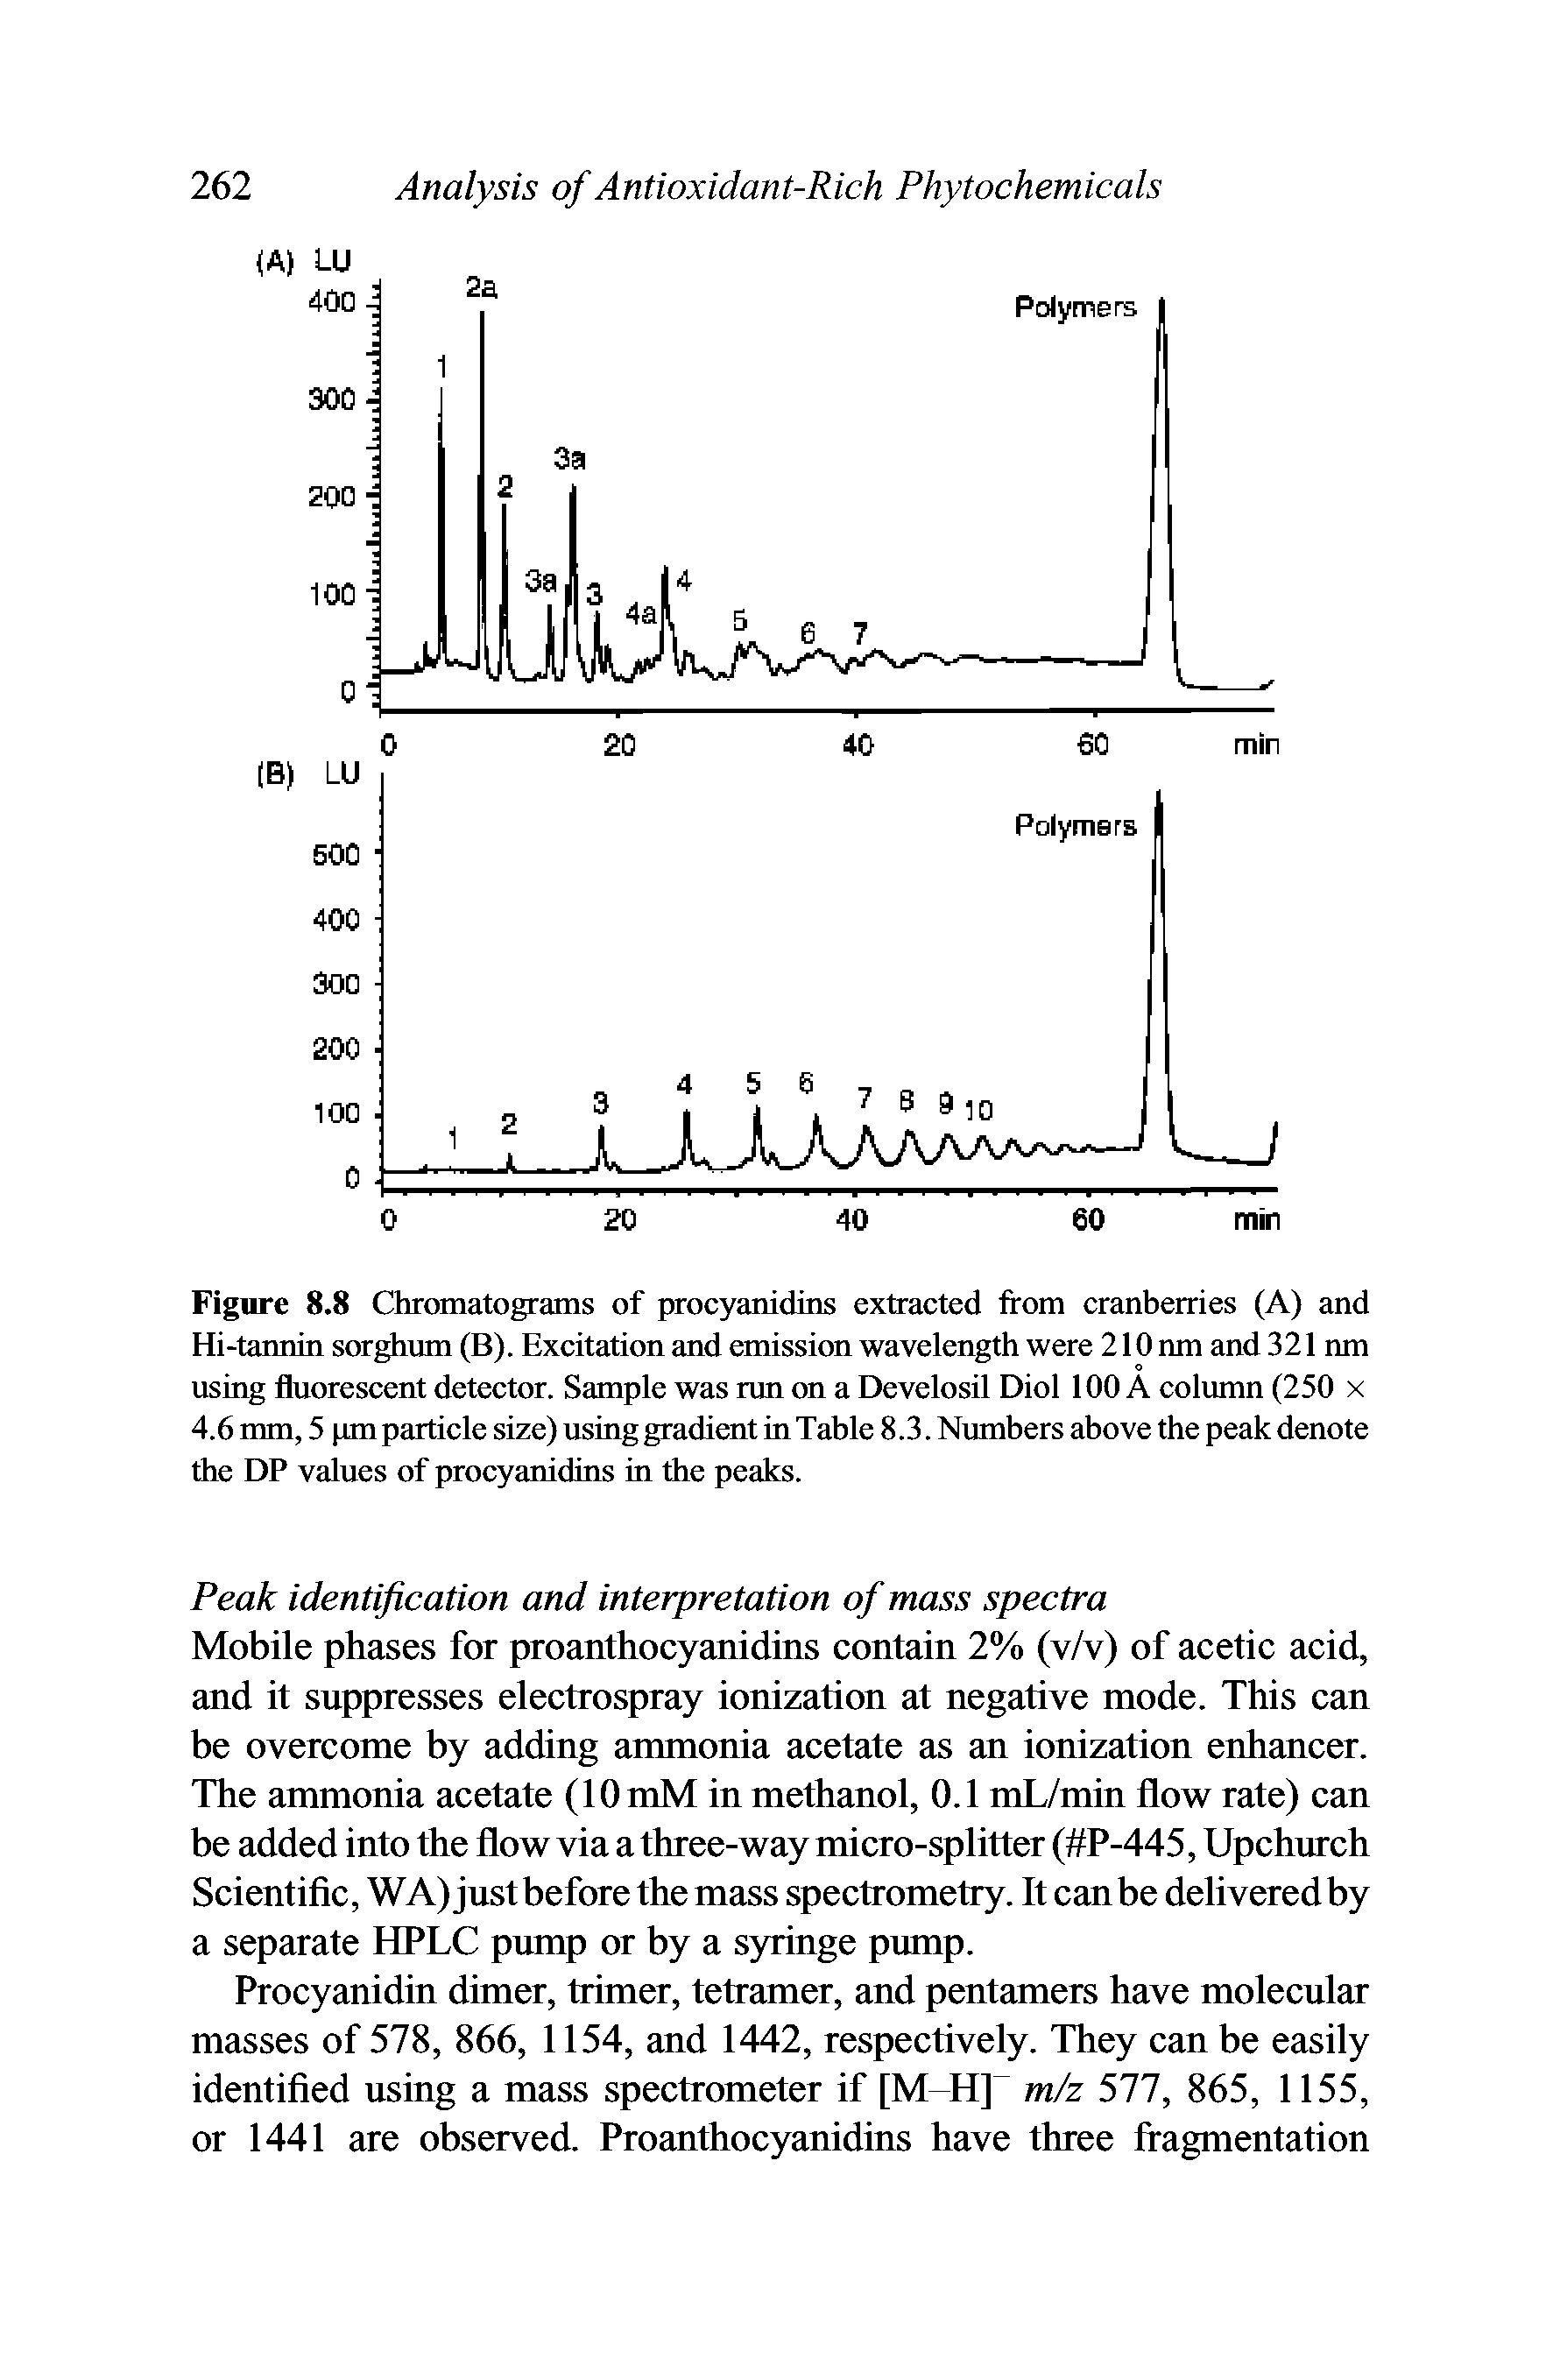 Figure 8.8 Chromatograms of procyanidins extracted from cranberries (A) and Hi-tannin sorghum (B). Excitation and emission wavelength were 210 nm and 321 nm using fluorescent detector. Sample was run on a Develosil Diol 100 A column (250 x 4.6 mm, 5 pm particle size) using gradient in Table 8.3. Numbers above the peak denote the DP values of procyanidins in the peaks.